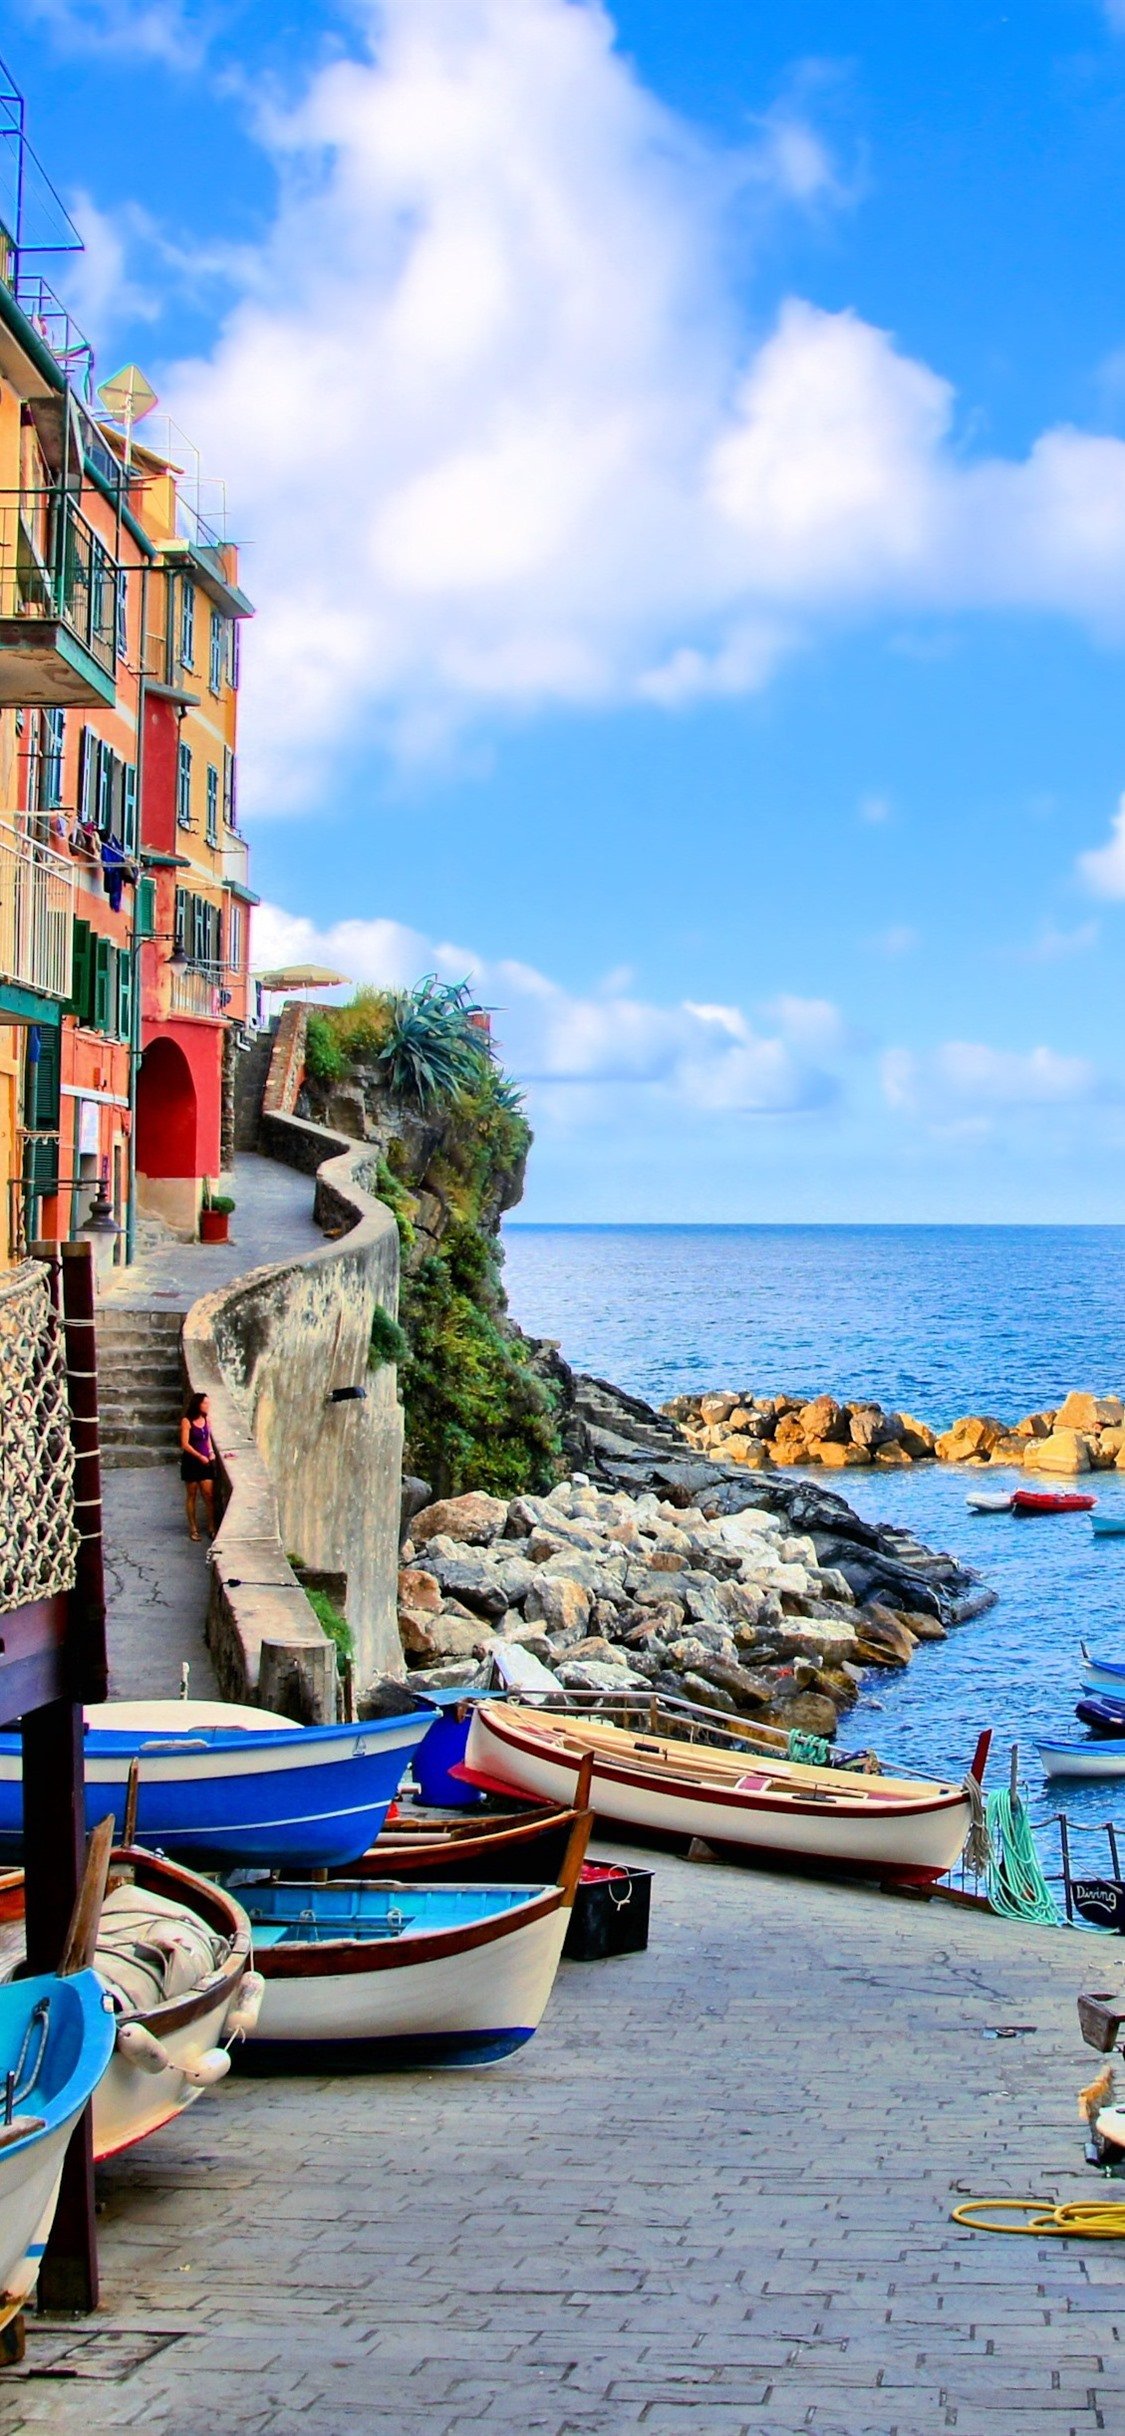 Italy, Riomaggiore, Houses, Boats, Sea 1125x2436 IPhone 11 Pro XS X Wallpaper, Background, Picture, Image